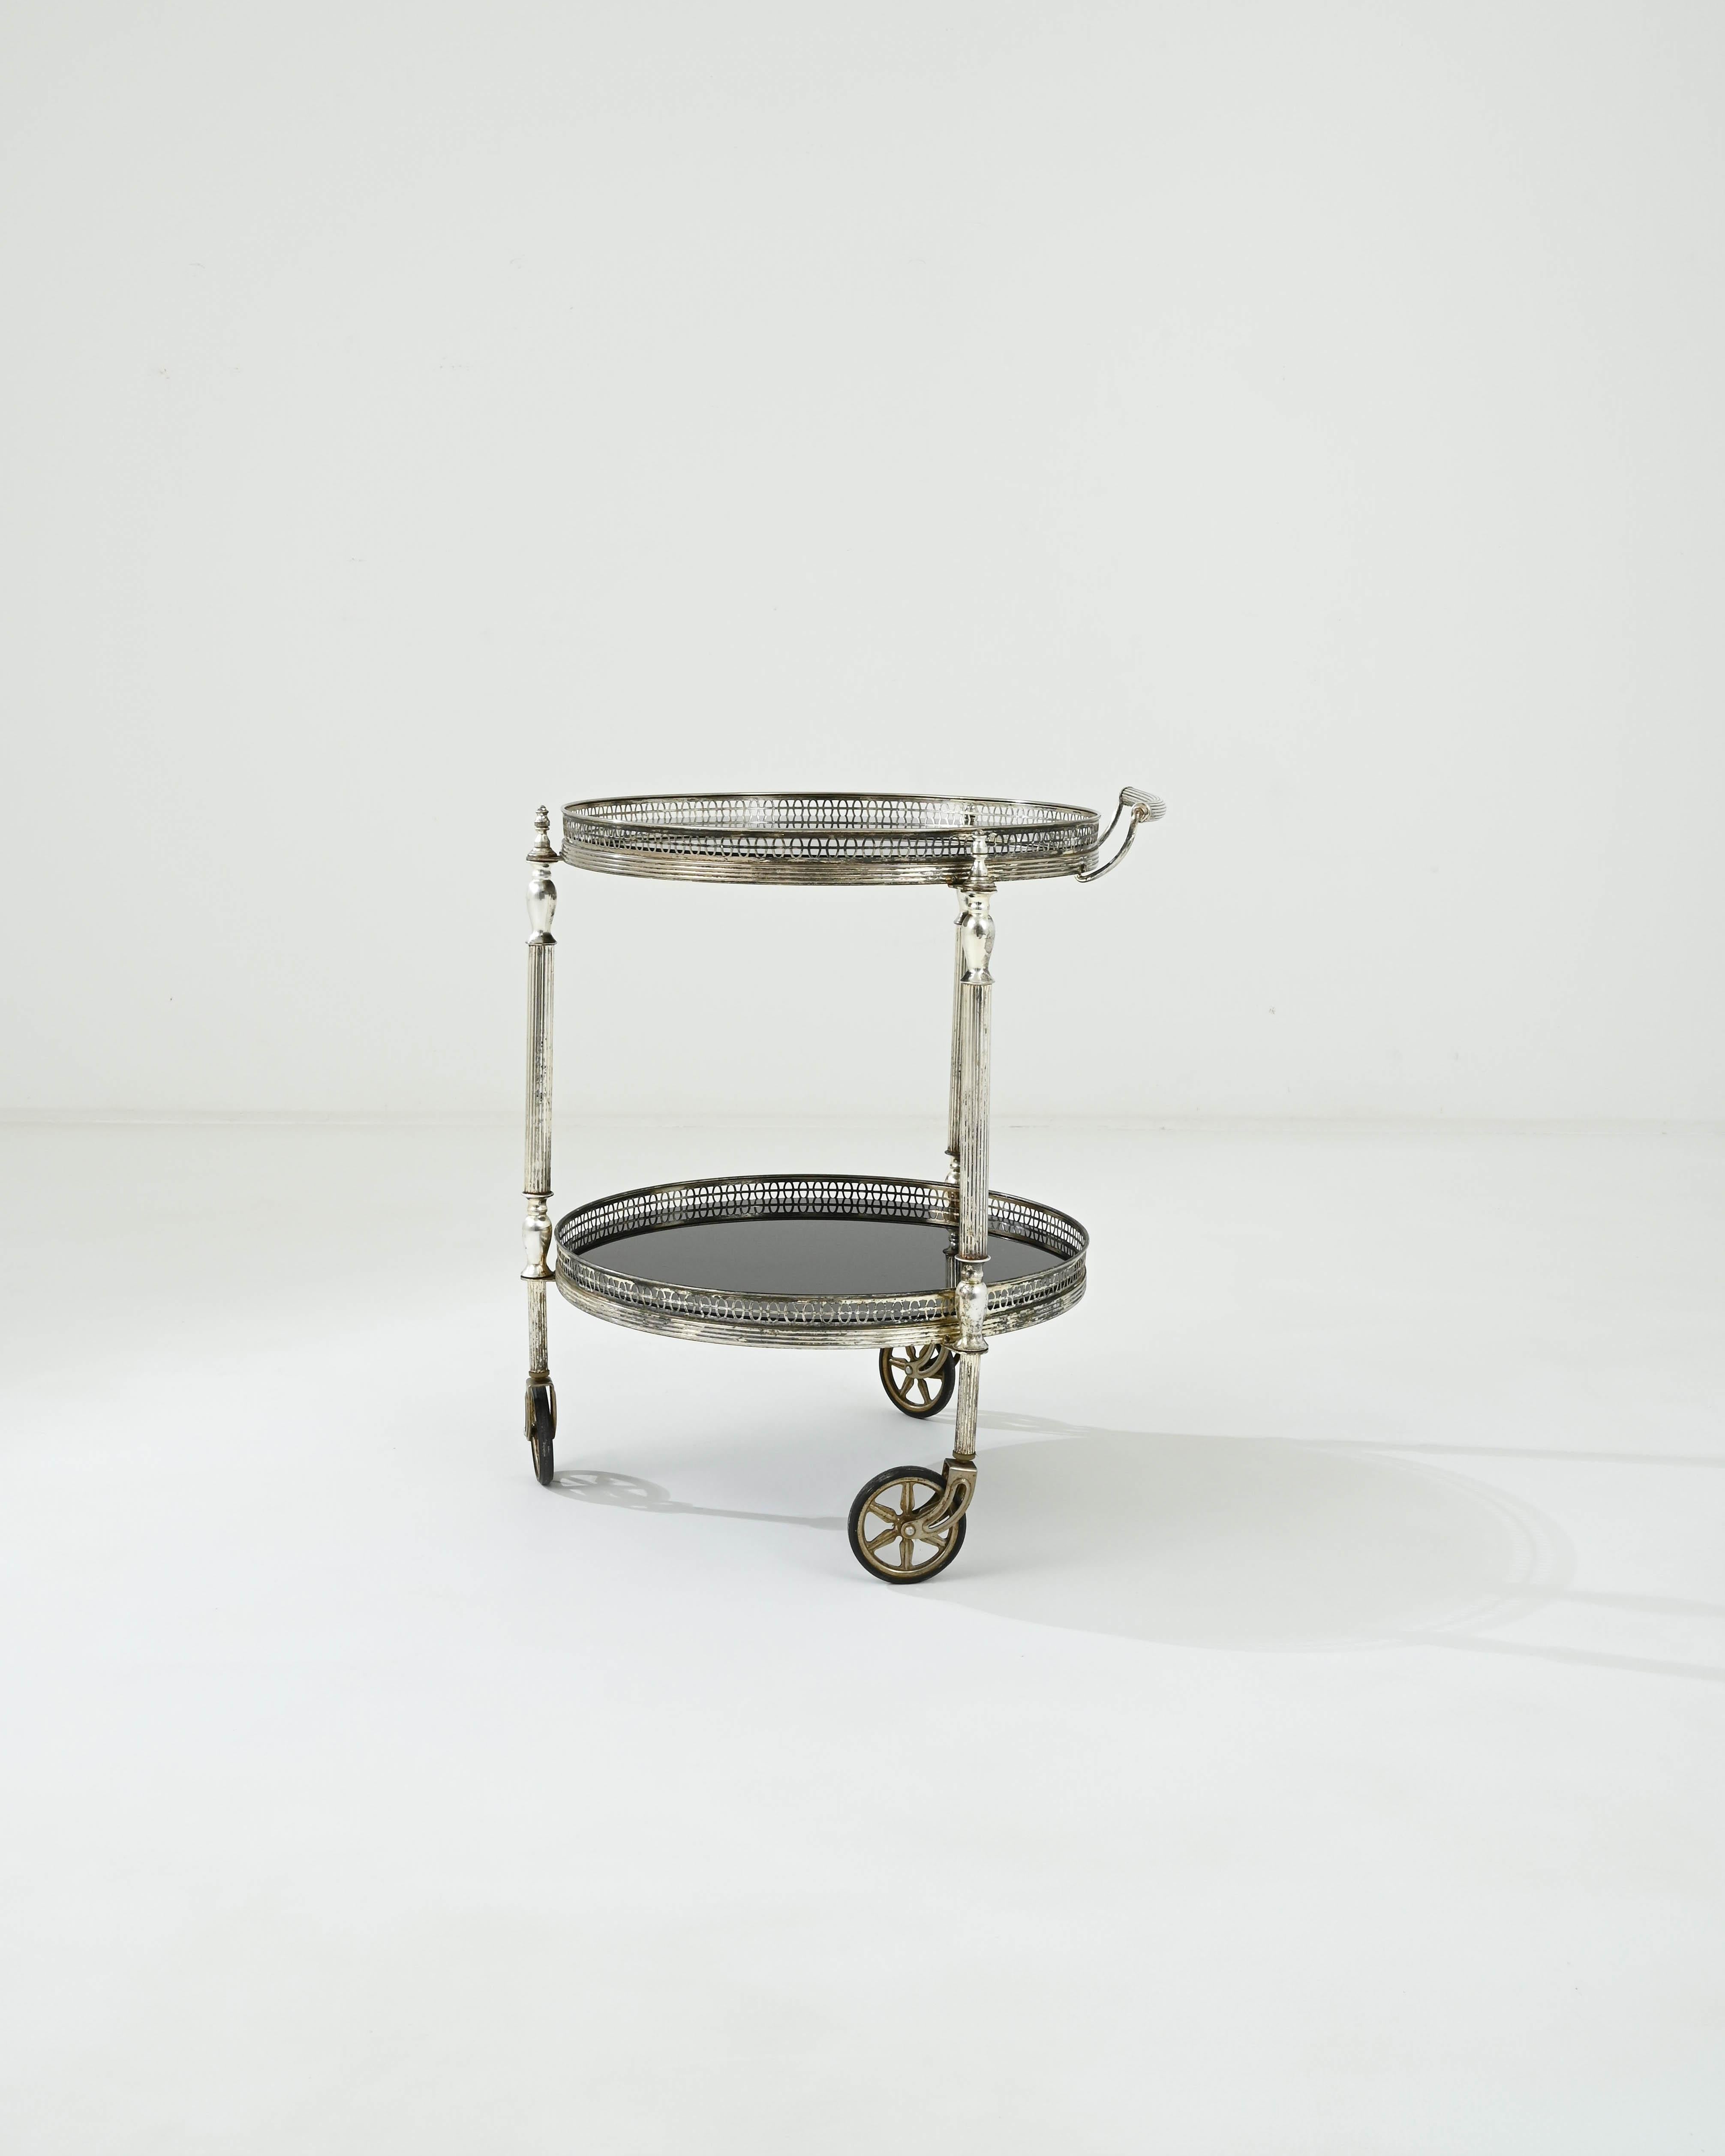 A metal and glass bar cart created in 20th Century France. This dazzling art deco inspired bar cart glitters with an opulent brilliance. The metal that composes its structure has been slowly covered in a compelling patina, subtly indicating its